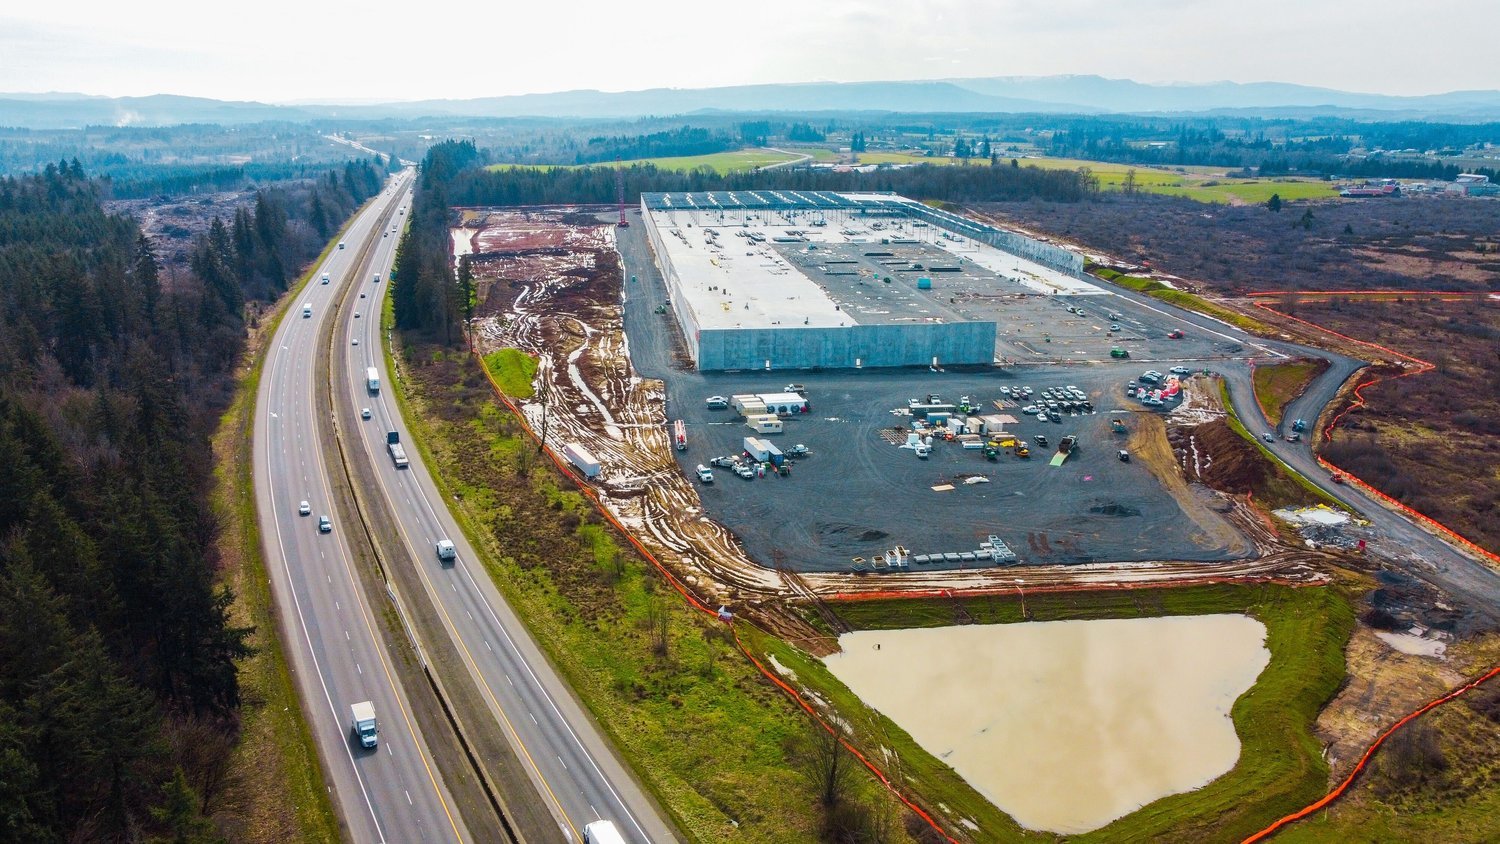 Winlock has been identified as a major growth opportunity in the county, with its industrial park slated to host a Lowe’s distribution facility, seen under construction here in March.